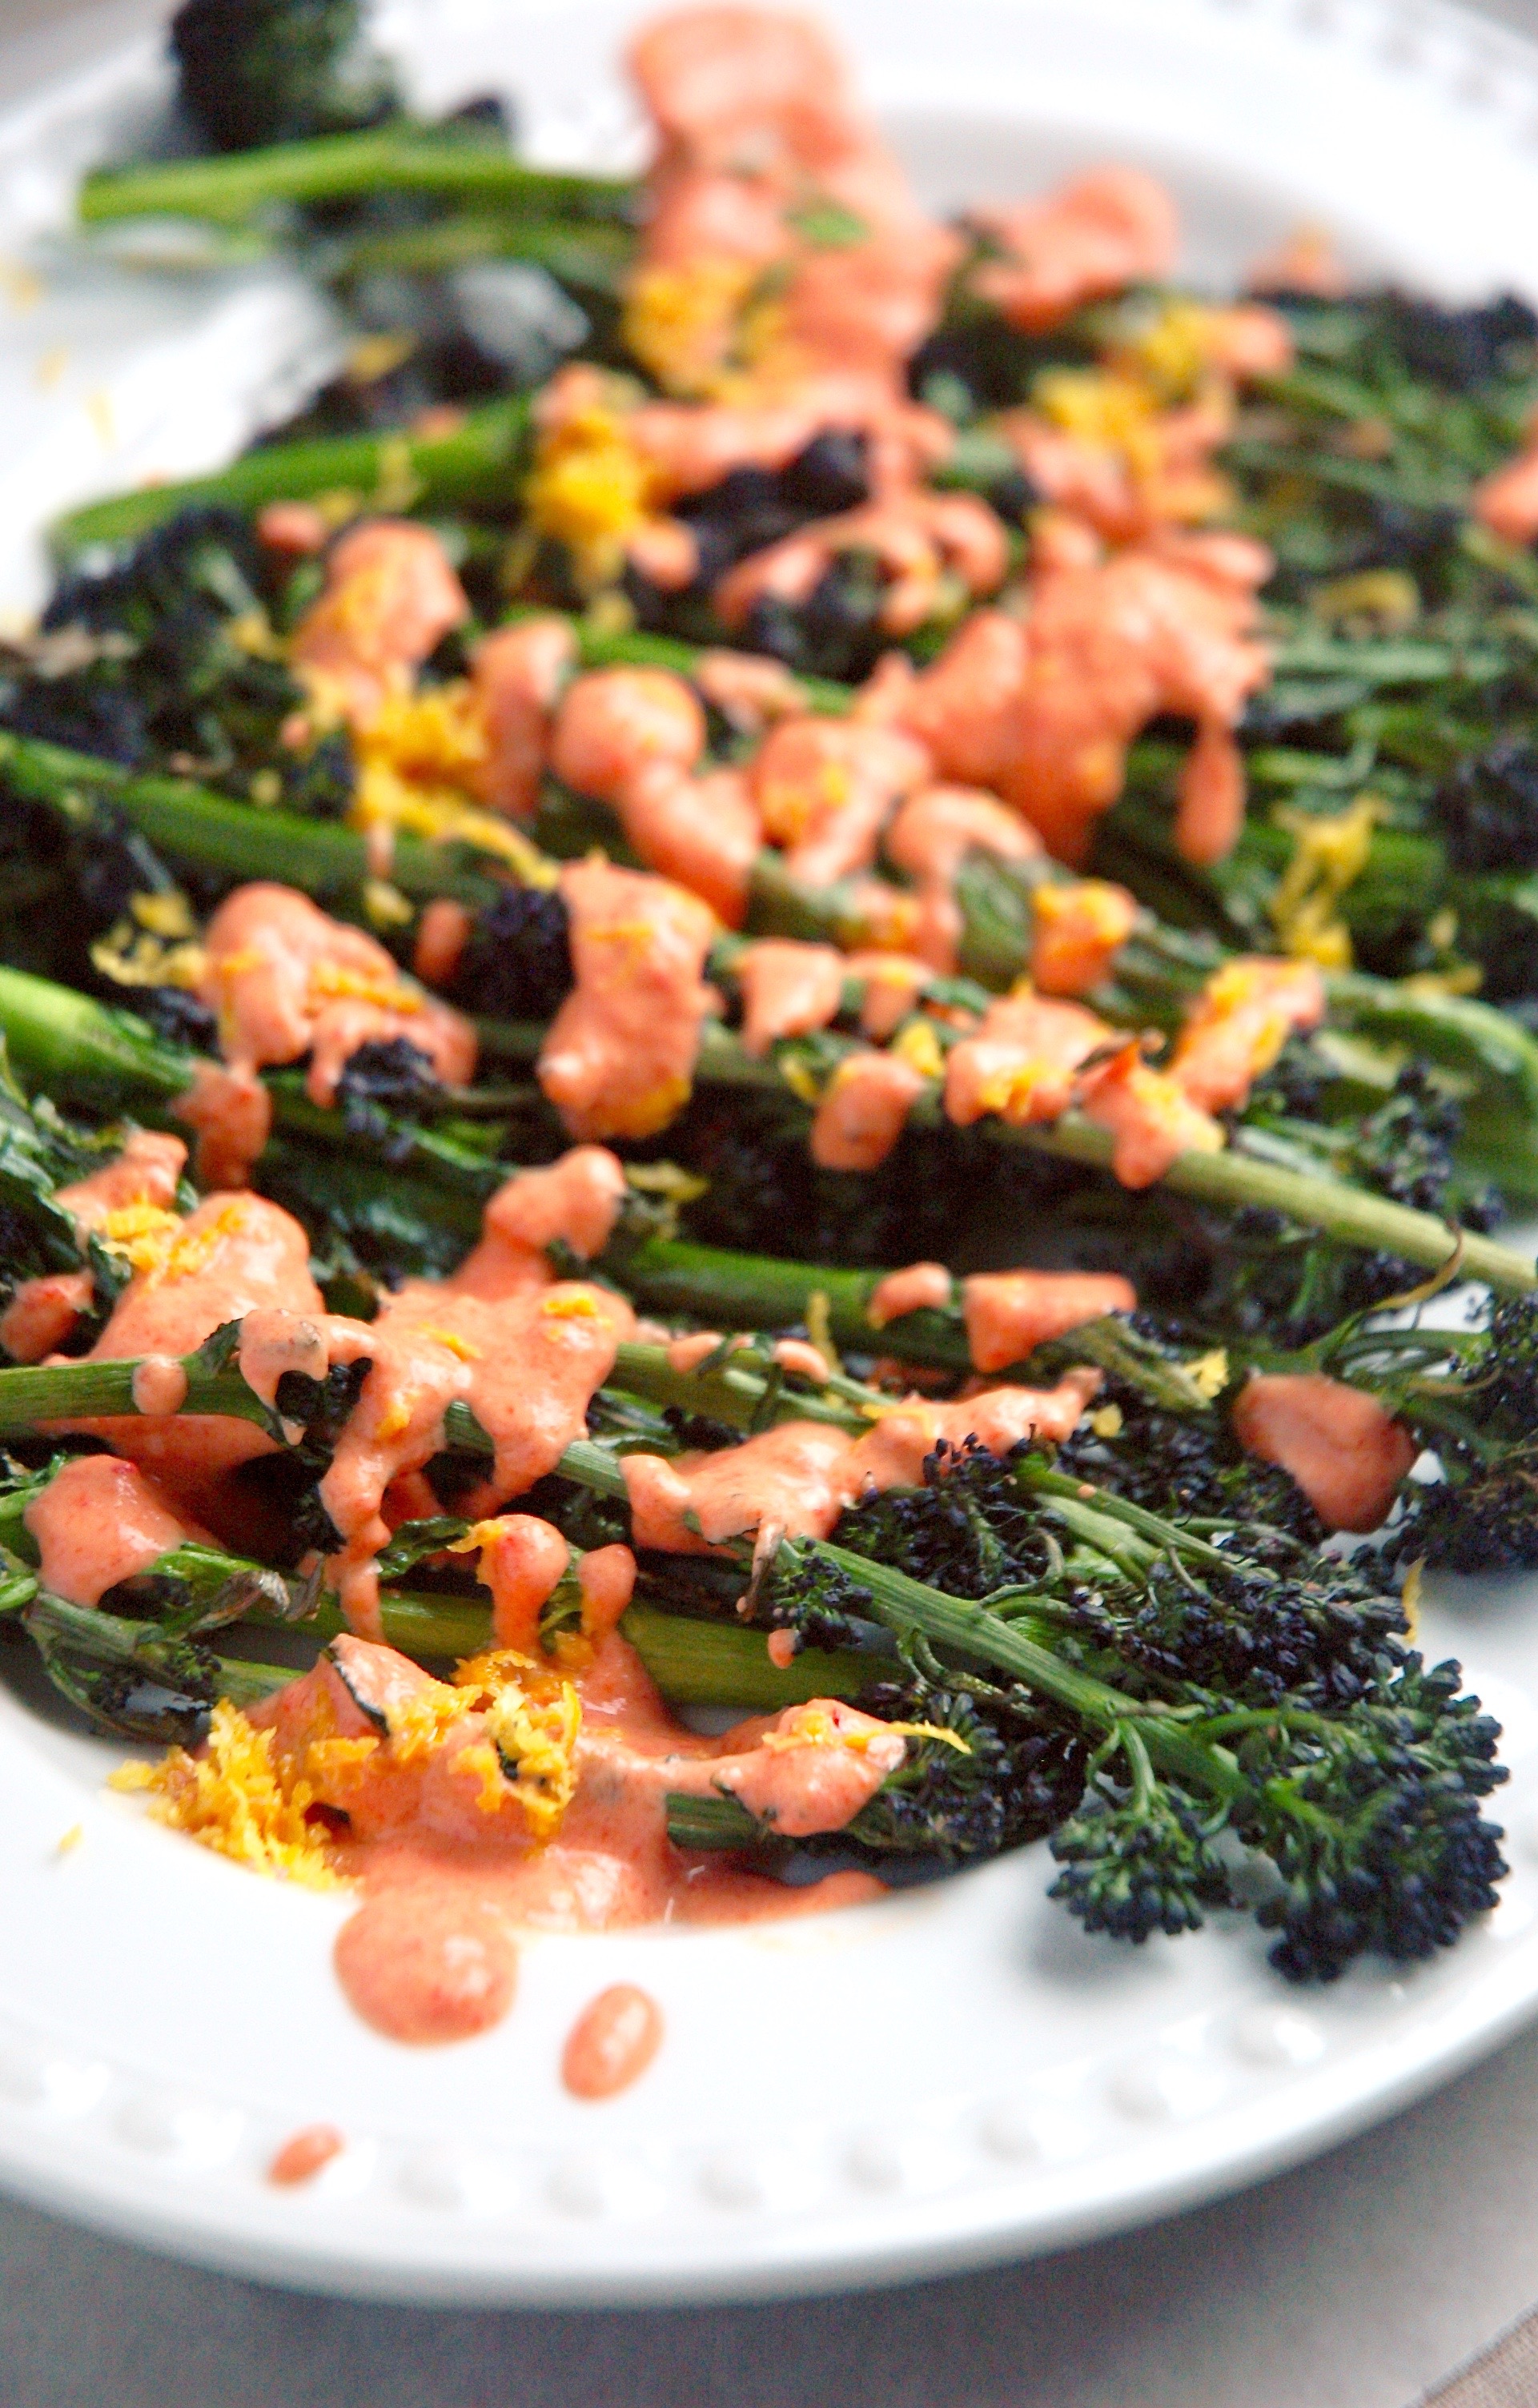 Charred Purple Broccoli with Creamy Roasted Red Pepper Sauce